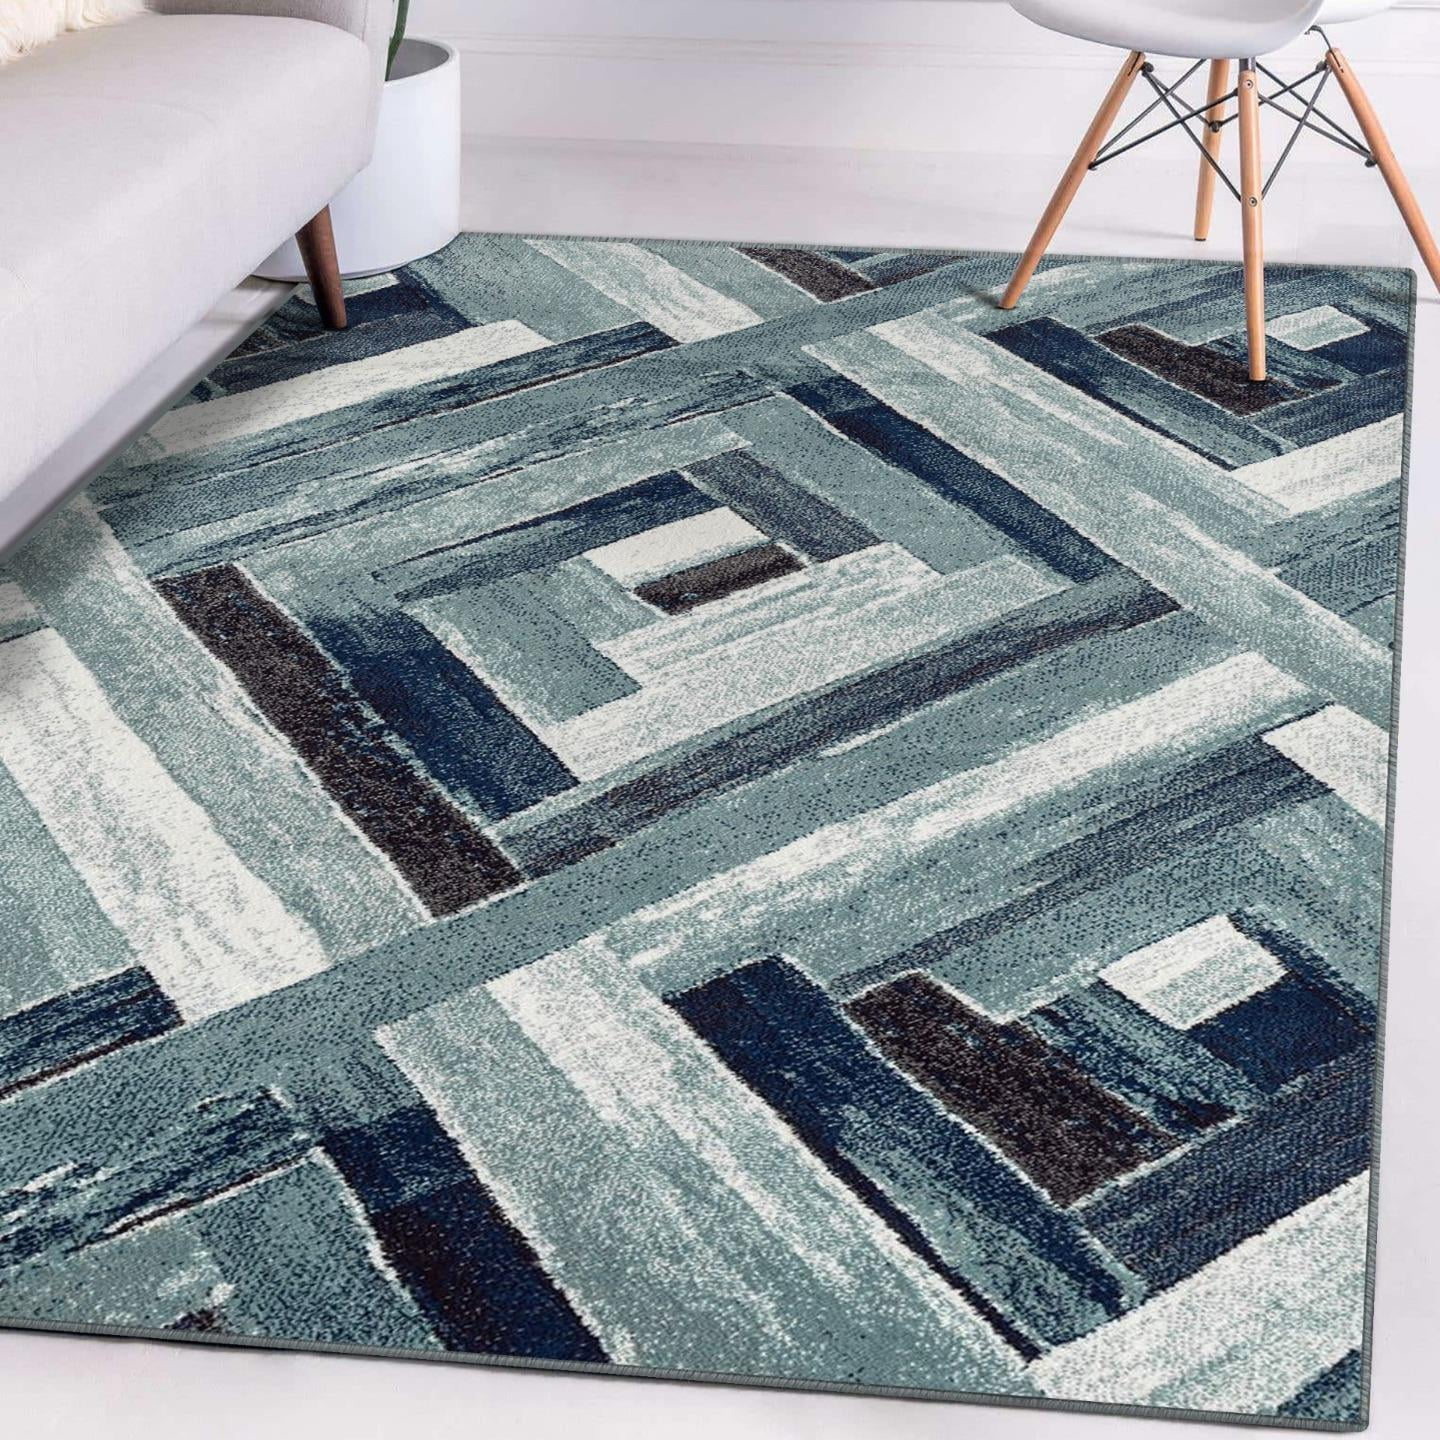 2.5 x 4 feet Scatter Rug Contemporary Style Abstract Geometric Multicolor  Design